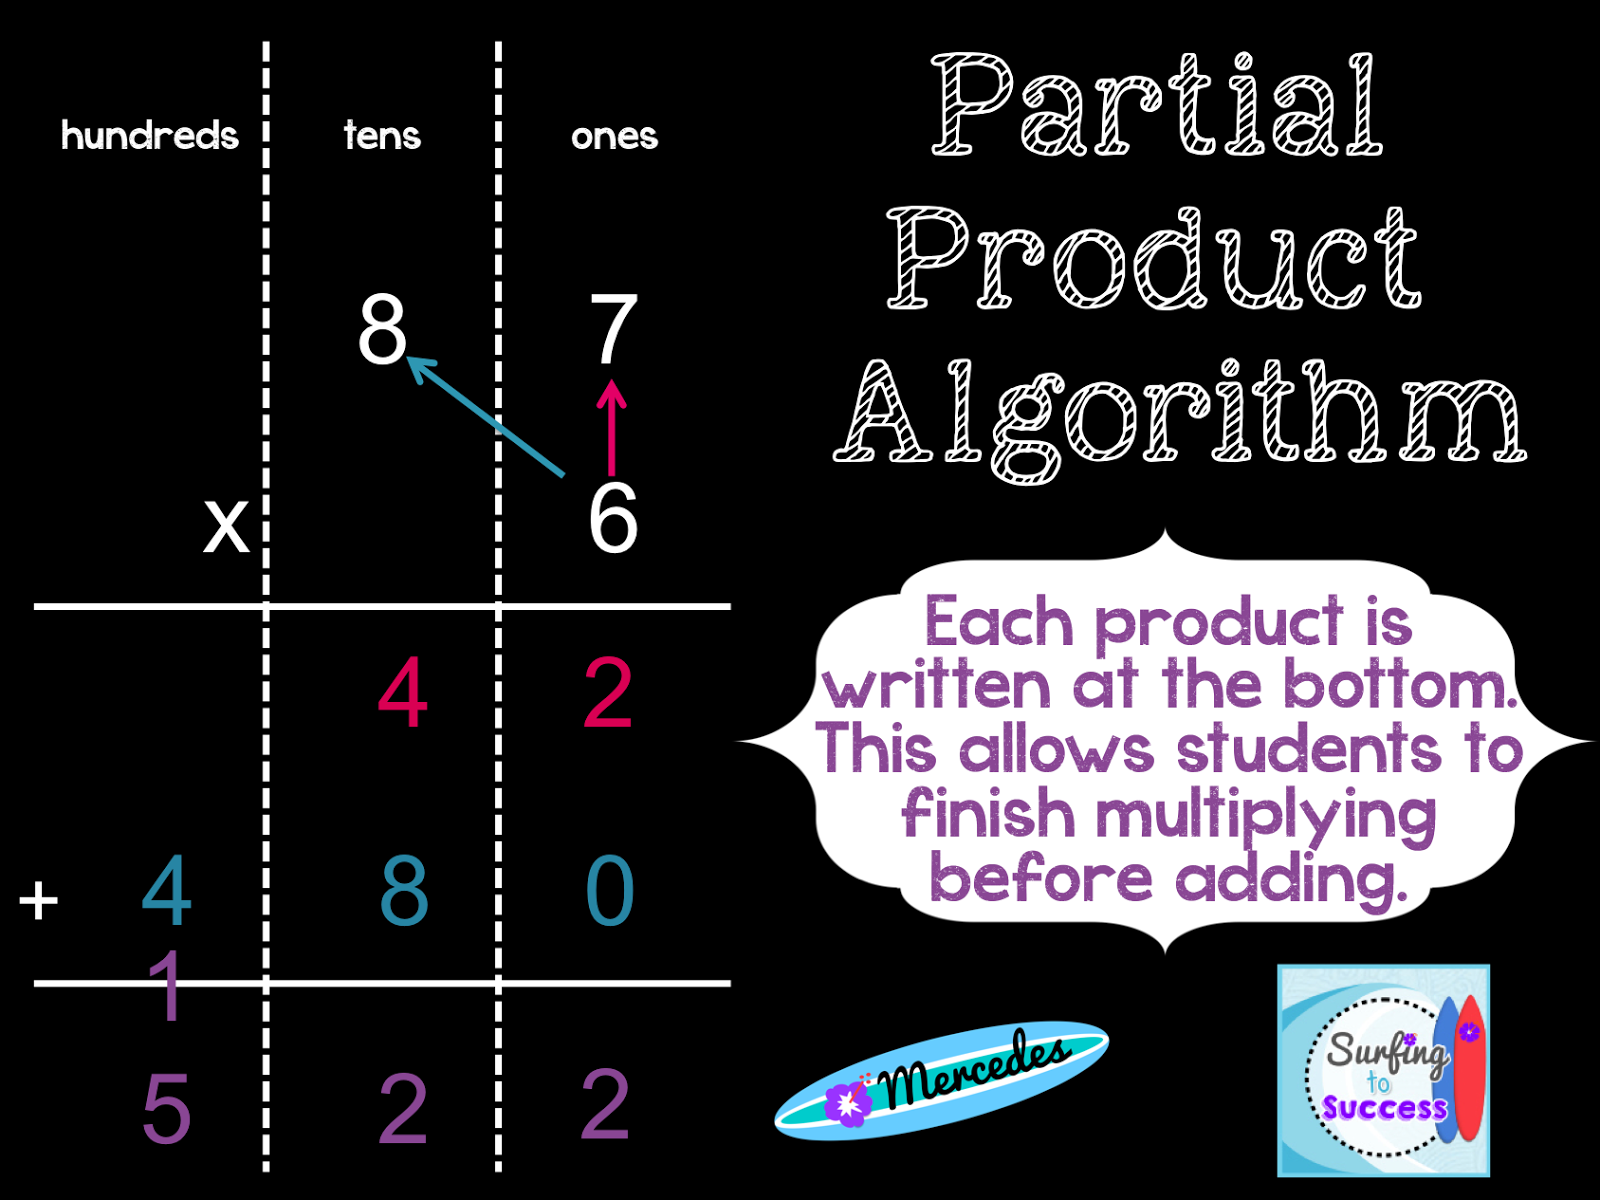 surfing-to-success-3-strategies-for-multiplying-multi-digit-numbers